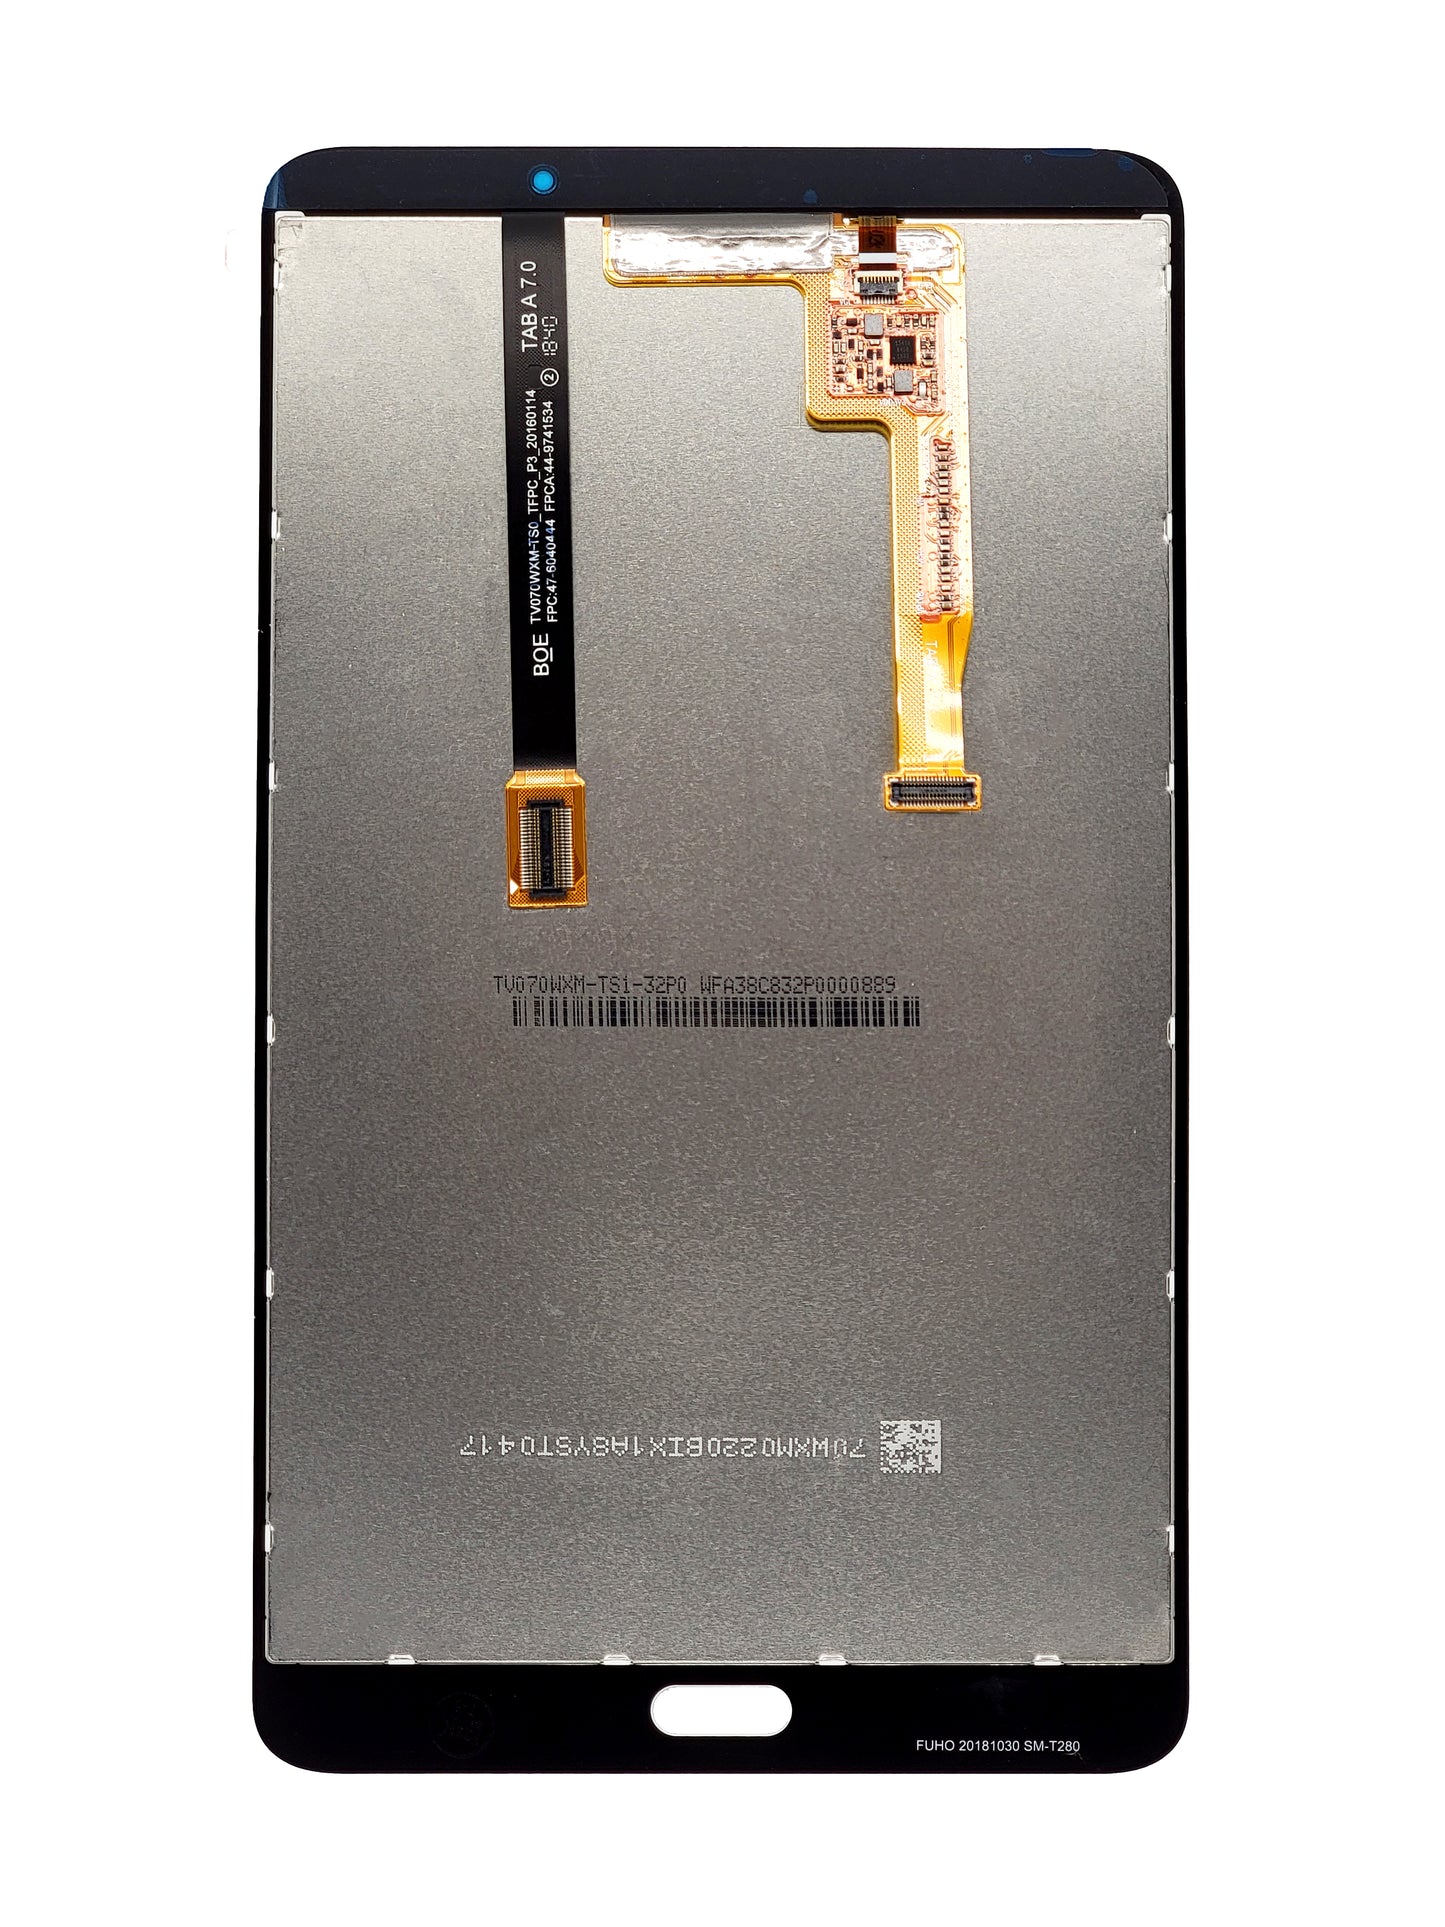 SGT Tab A 7" (T280) LCD Assembly with Digitizer (White)